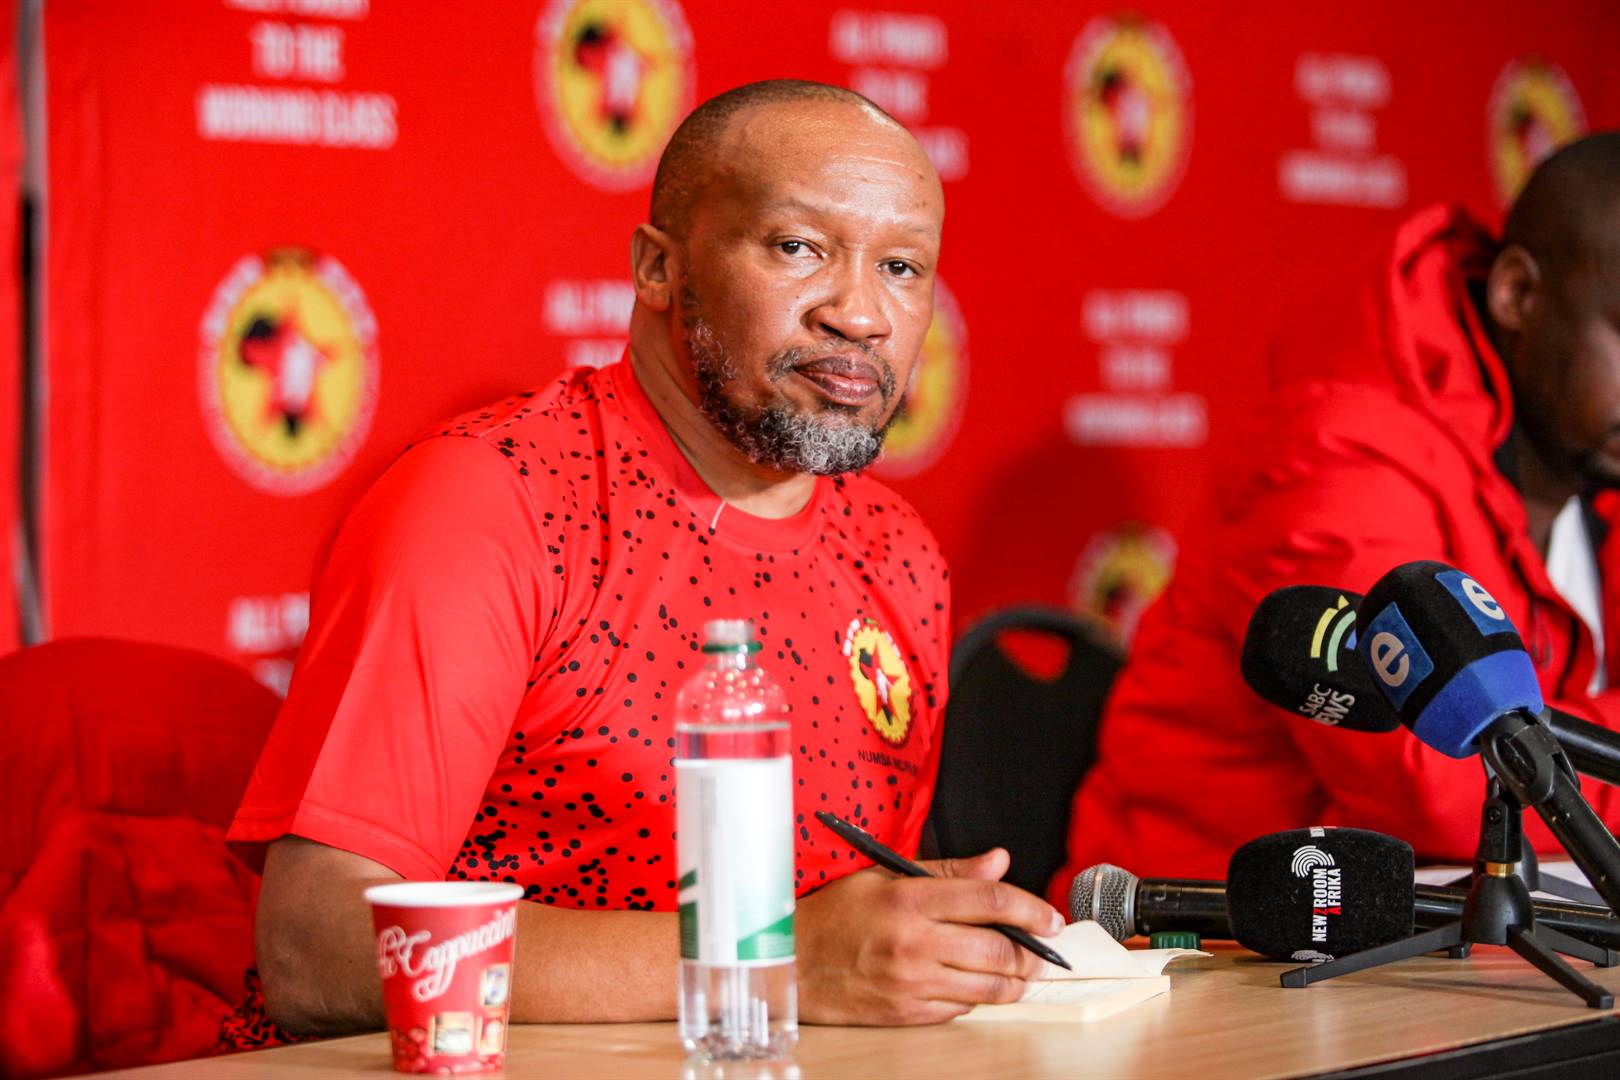 Numsa general secretary, Irvin Jim, says this is a big win for them as other unions are encouraging their members to settle for 3% increases.